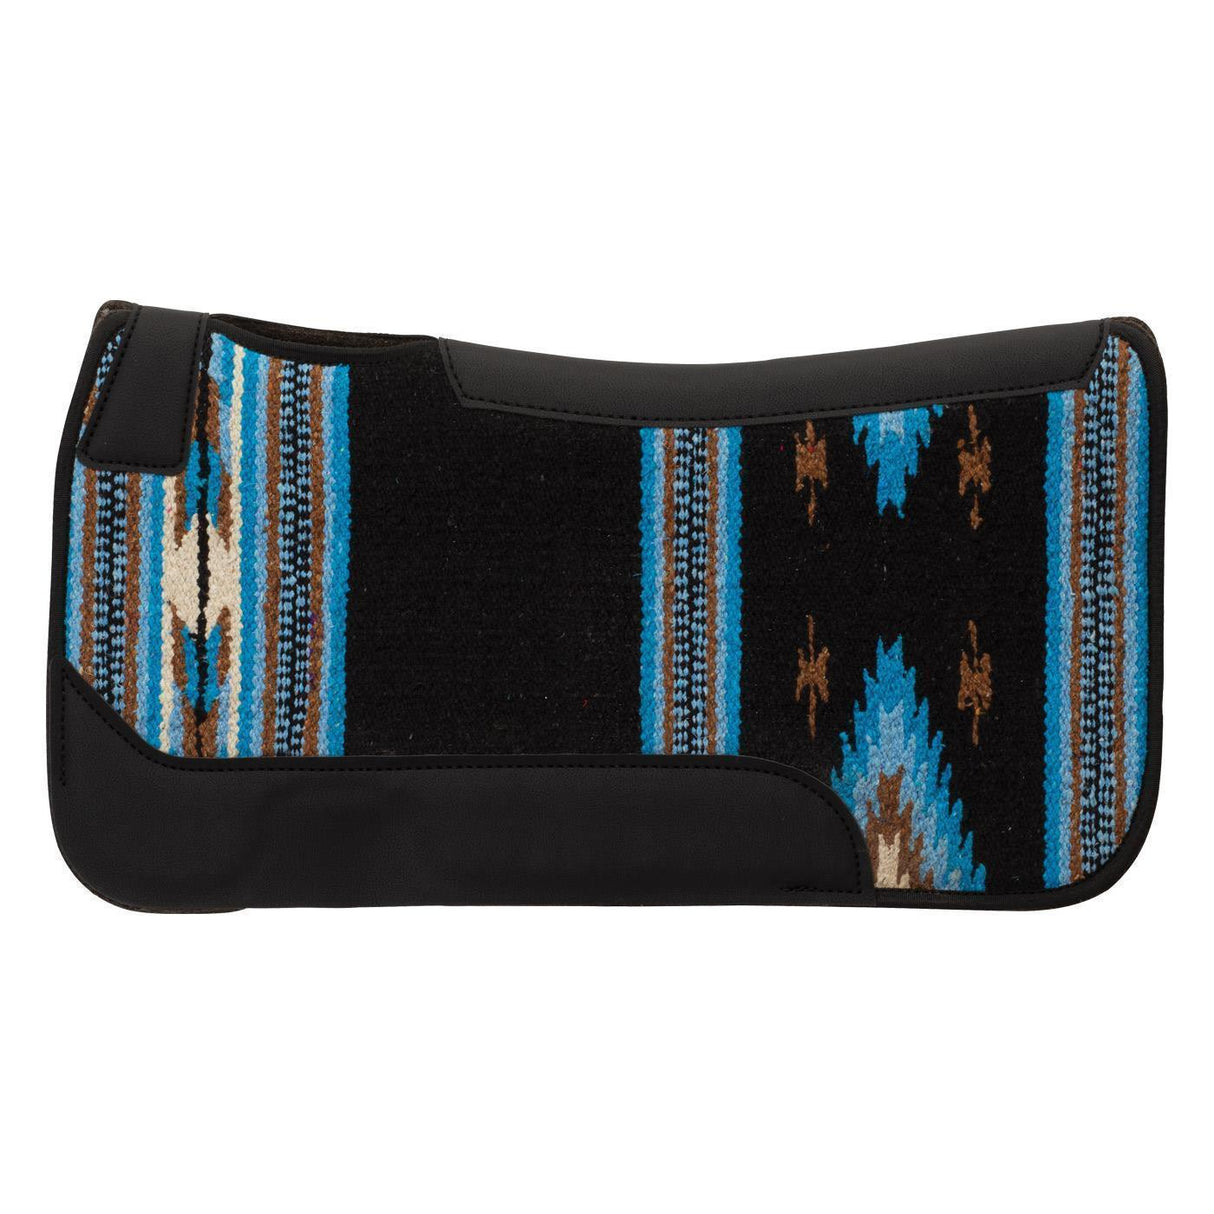 Therapeutic Western Saddle Pad Liner